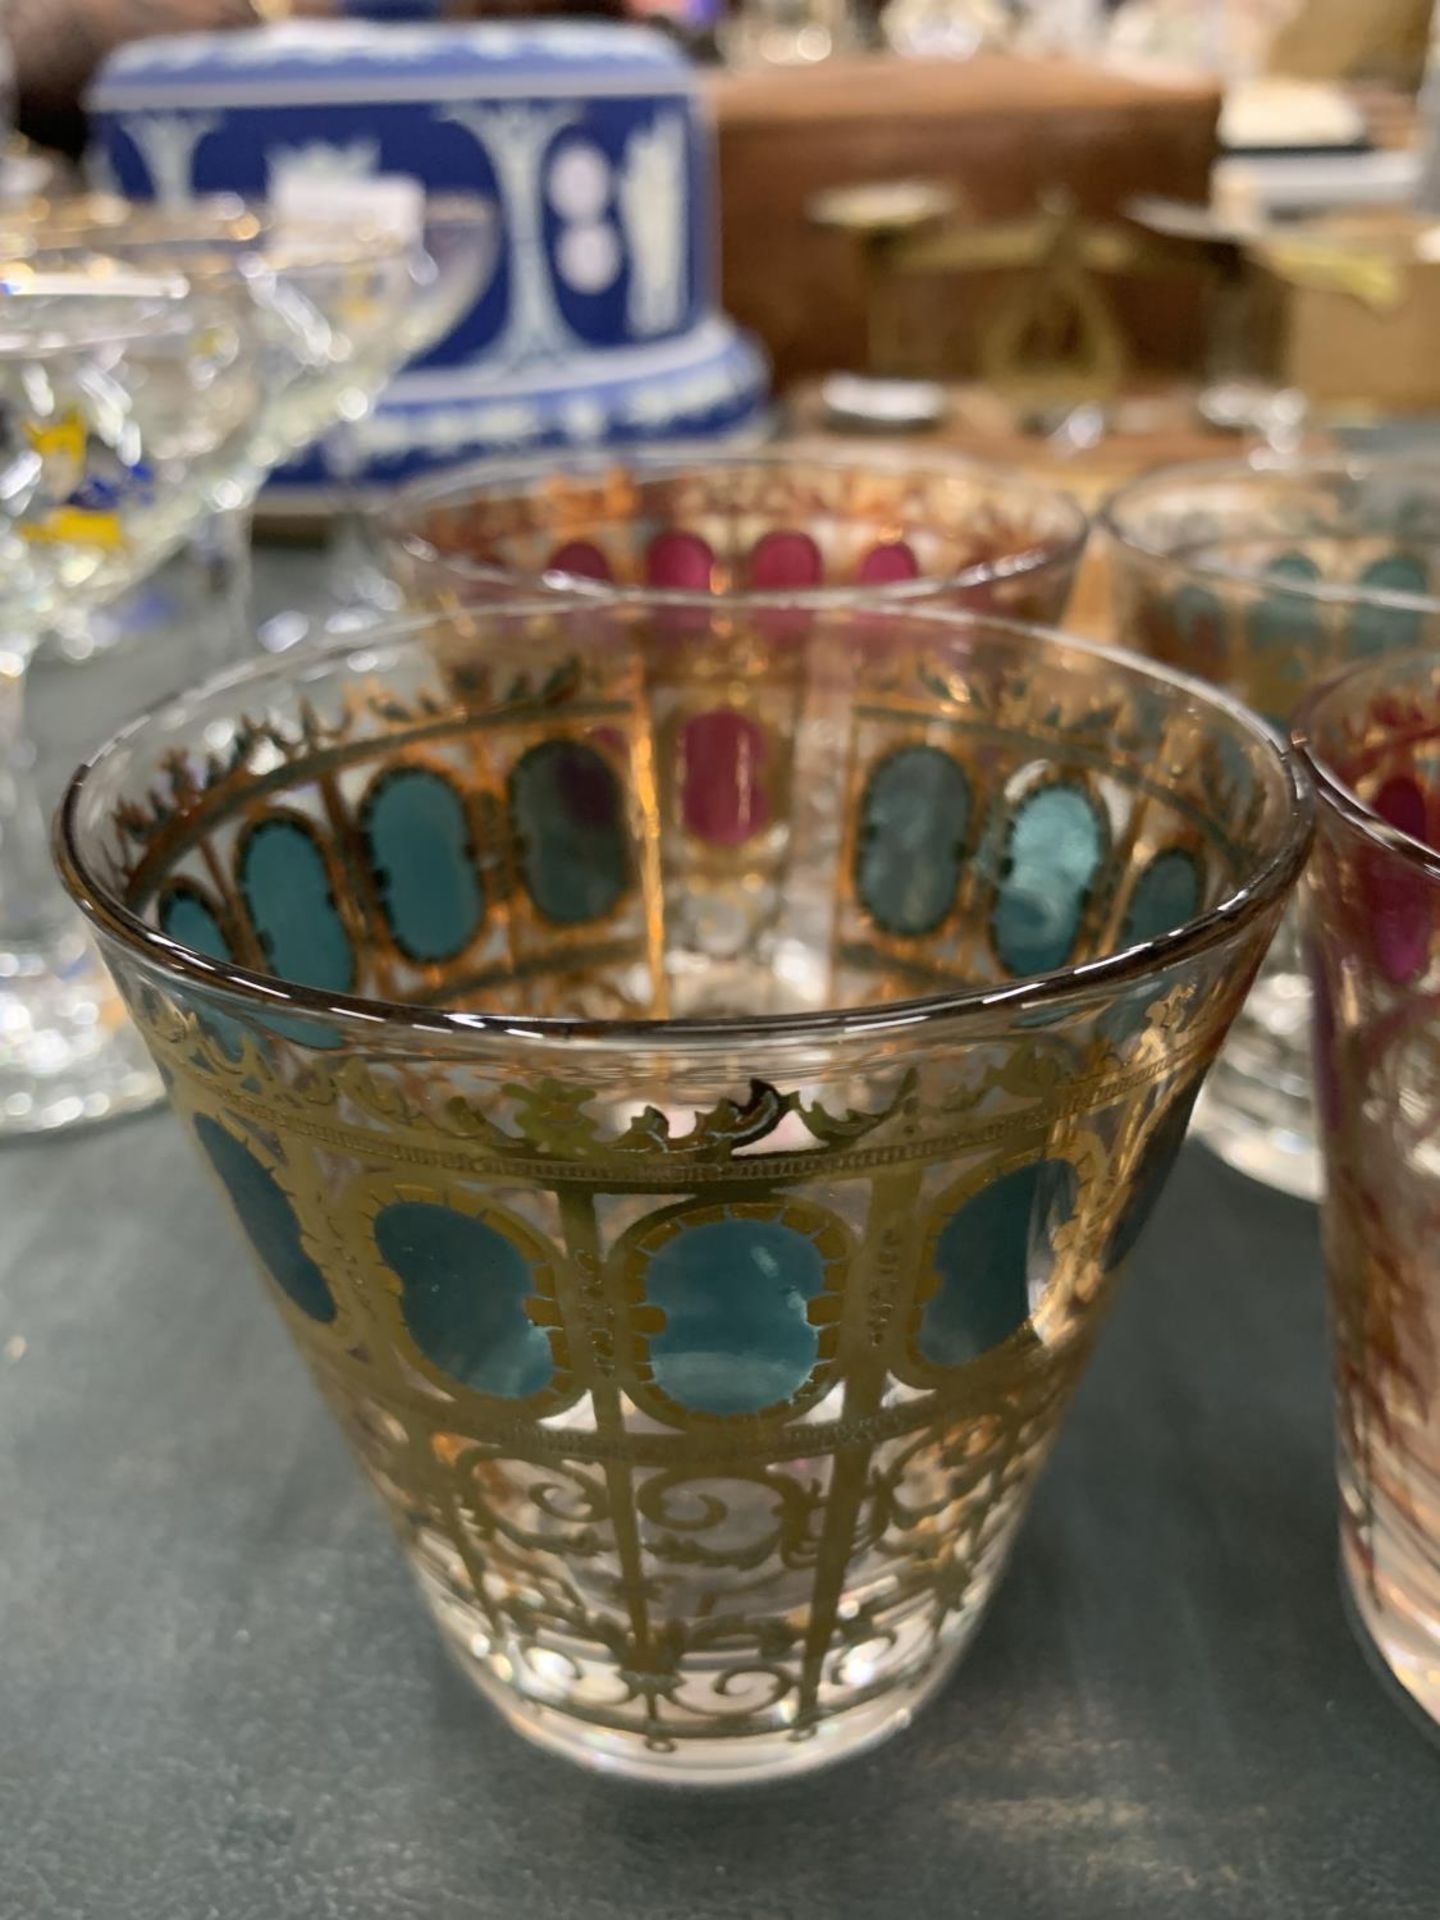 FOUR VINTAGE CULVER GLASSES WITH SCROLL DESIGN, TWO GREEN AND TWO CRANBERRY - Image 2 of 3